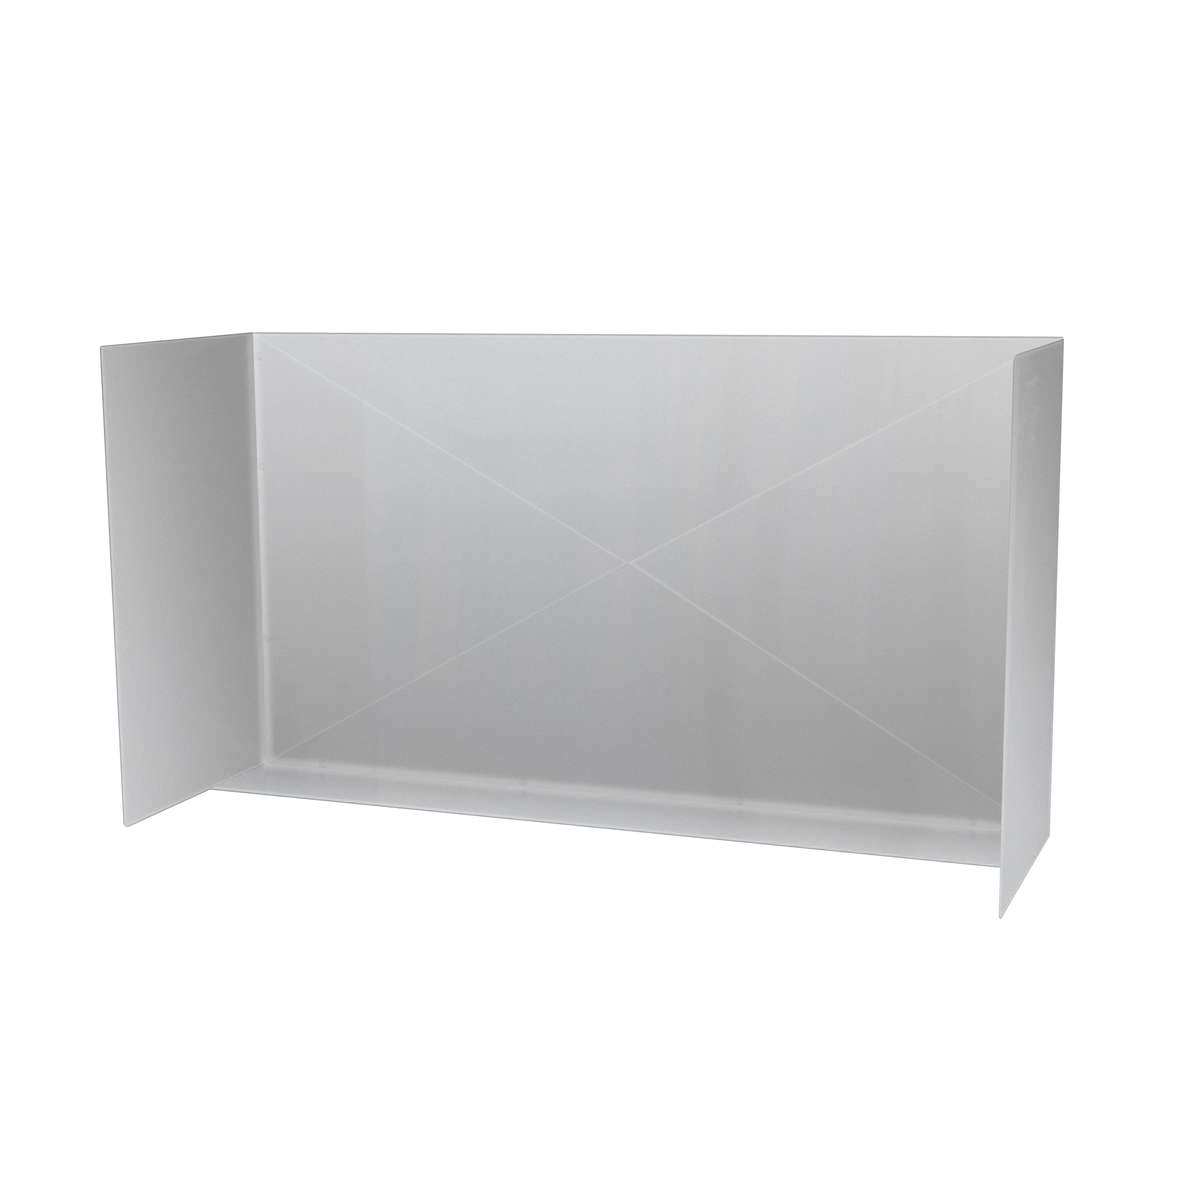 48" Stainless Steel Wind Guard (Fits 36-44" Grills)